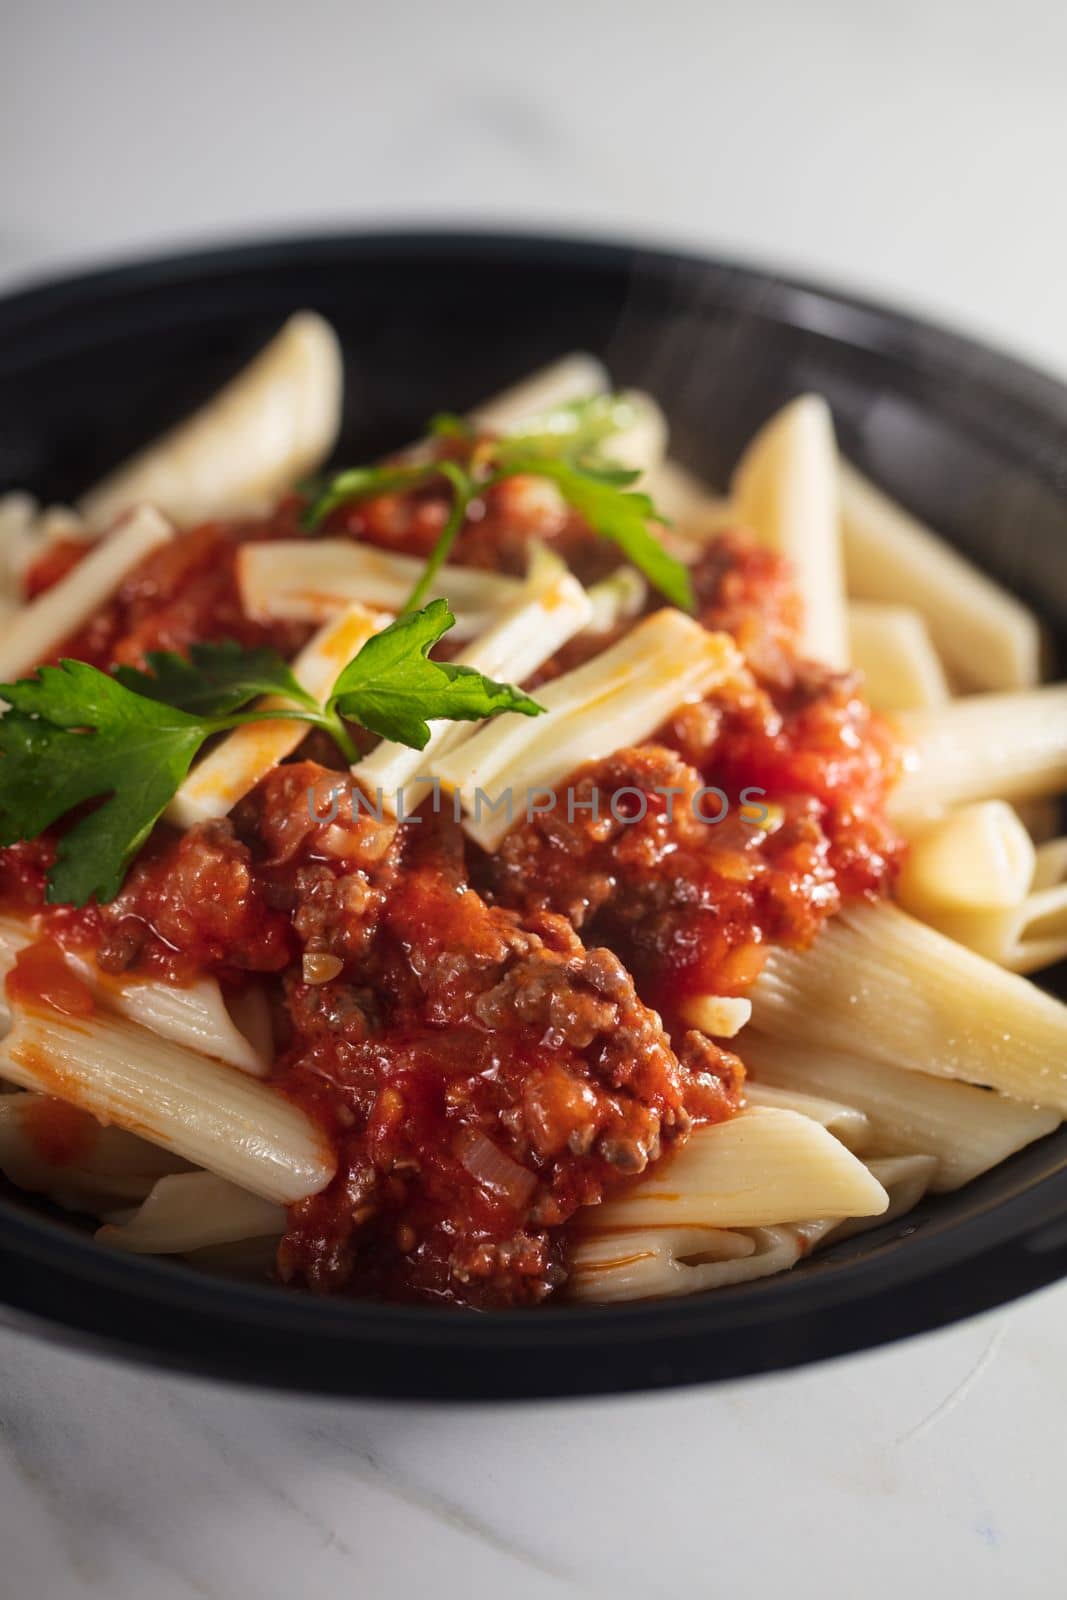 Pasta Penne with Tomato Bolognese Sauce, Parmesan Cheese and Basil. by senkaya